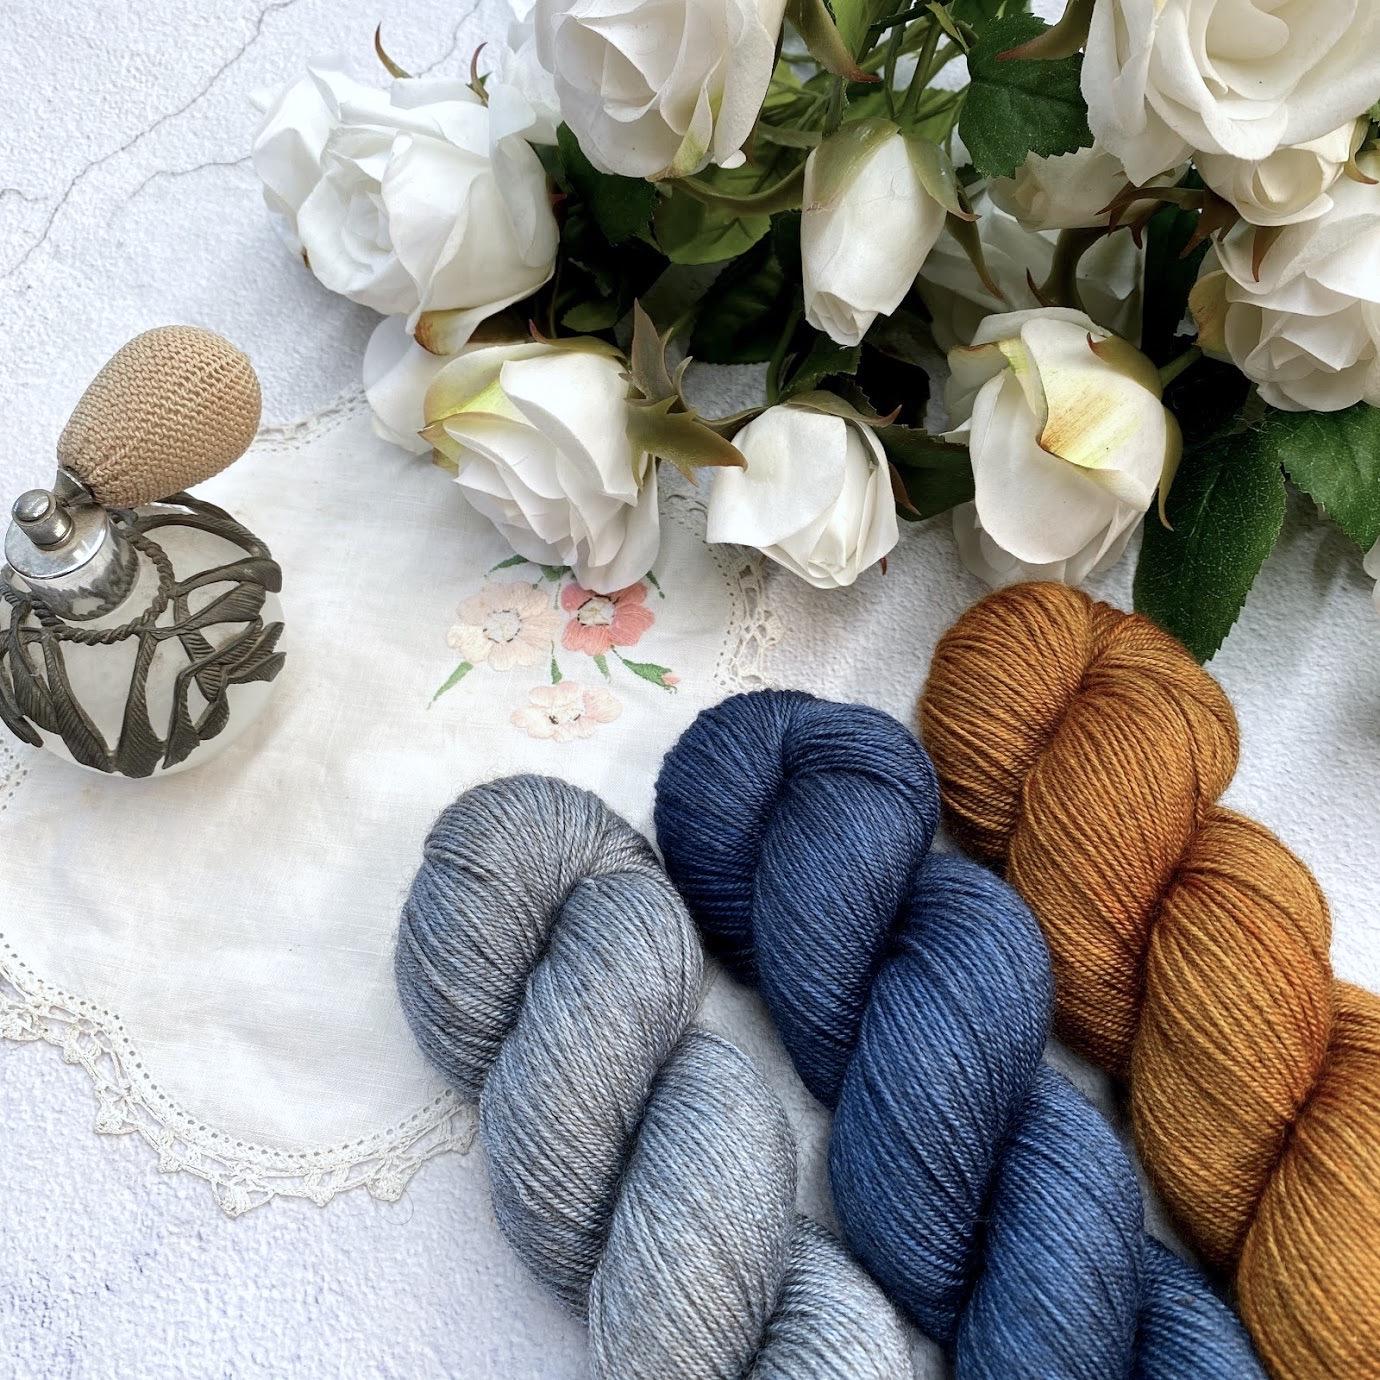 3 Skiens of yarn in a grey, blue and yellow on a white background with some white roses